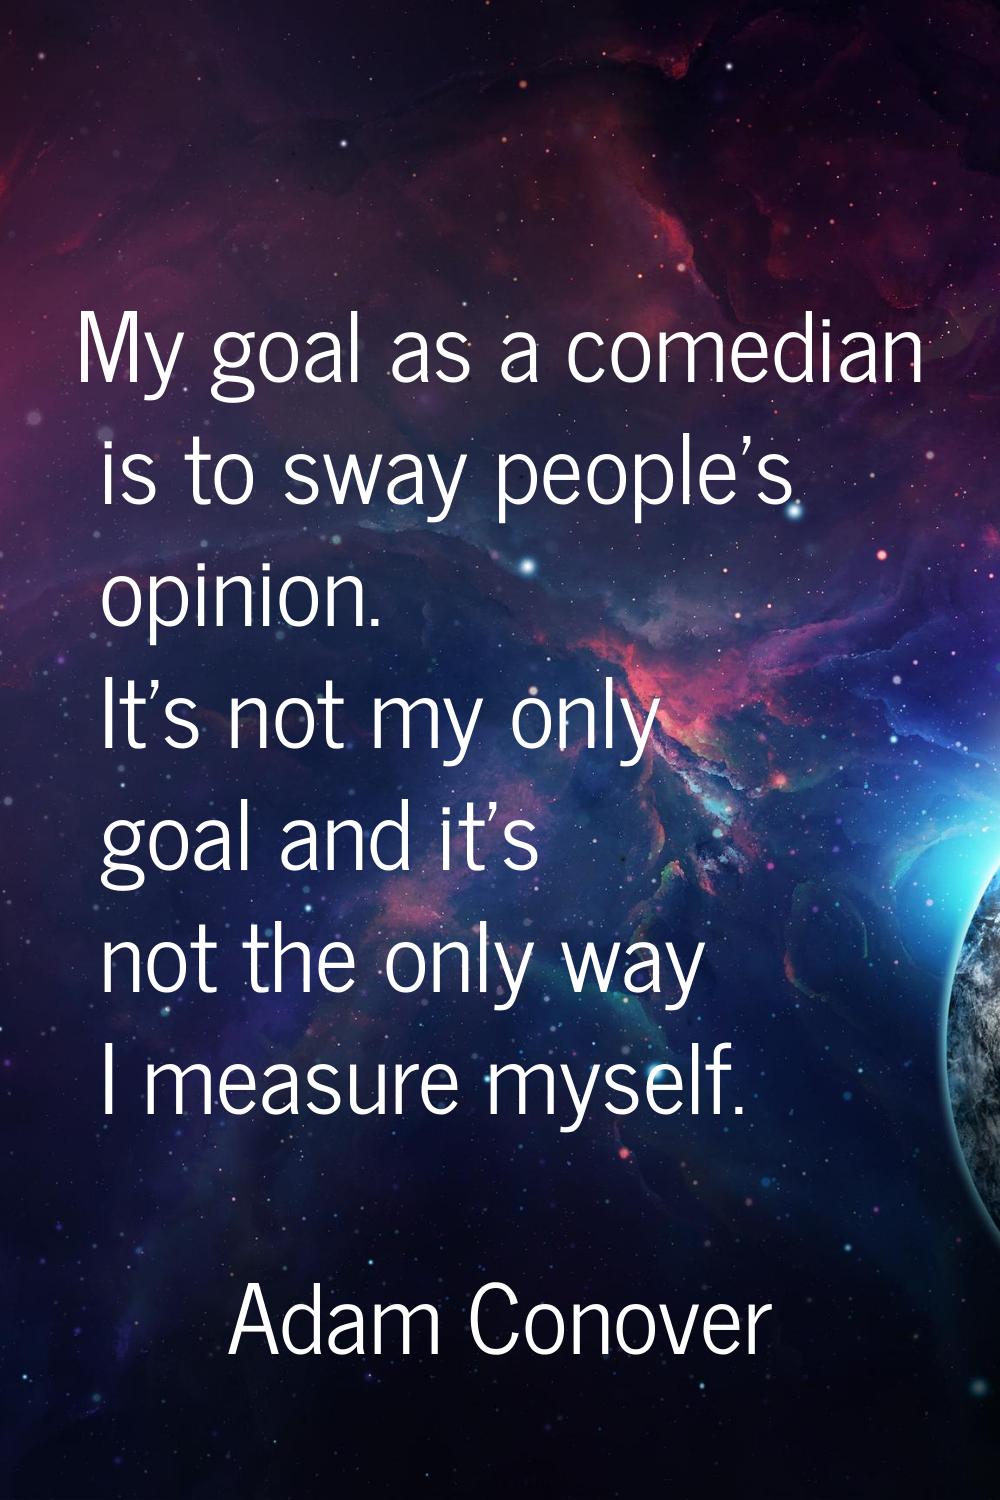 My goal as a comedian is to sway people's opinion. It's not my only goal and it's not the only way 